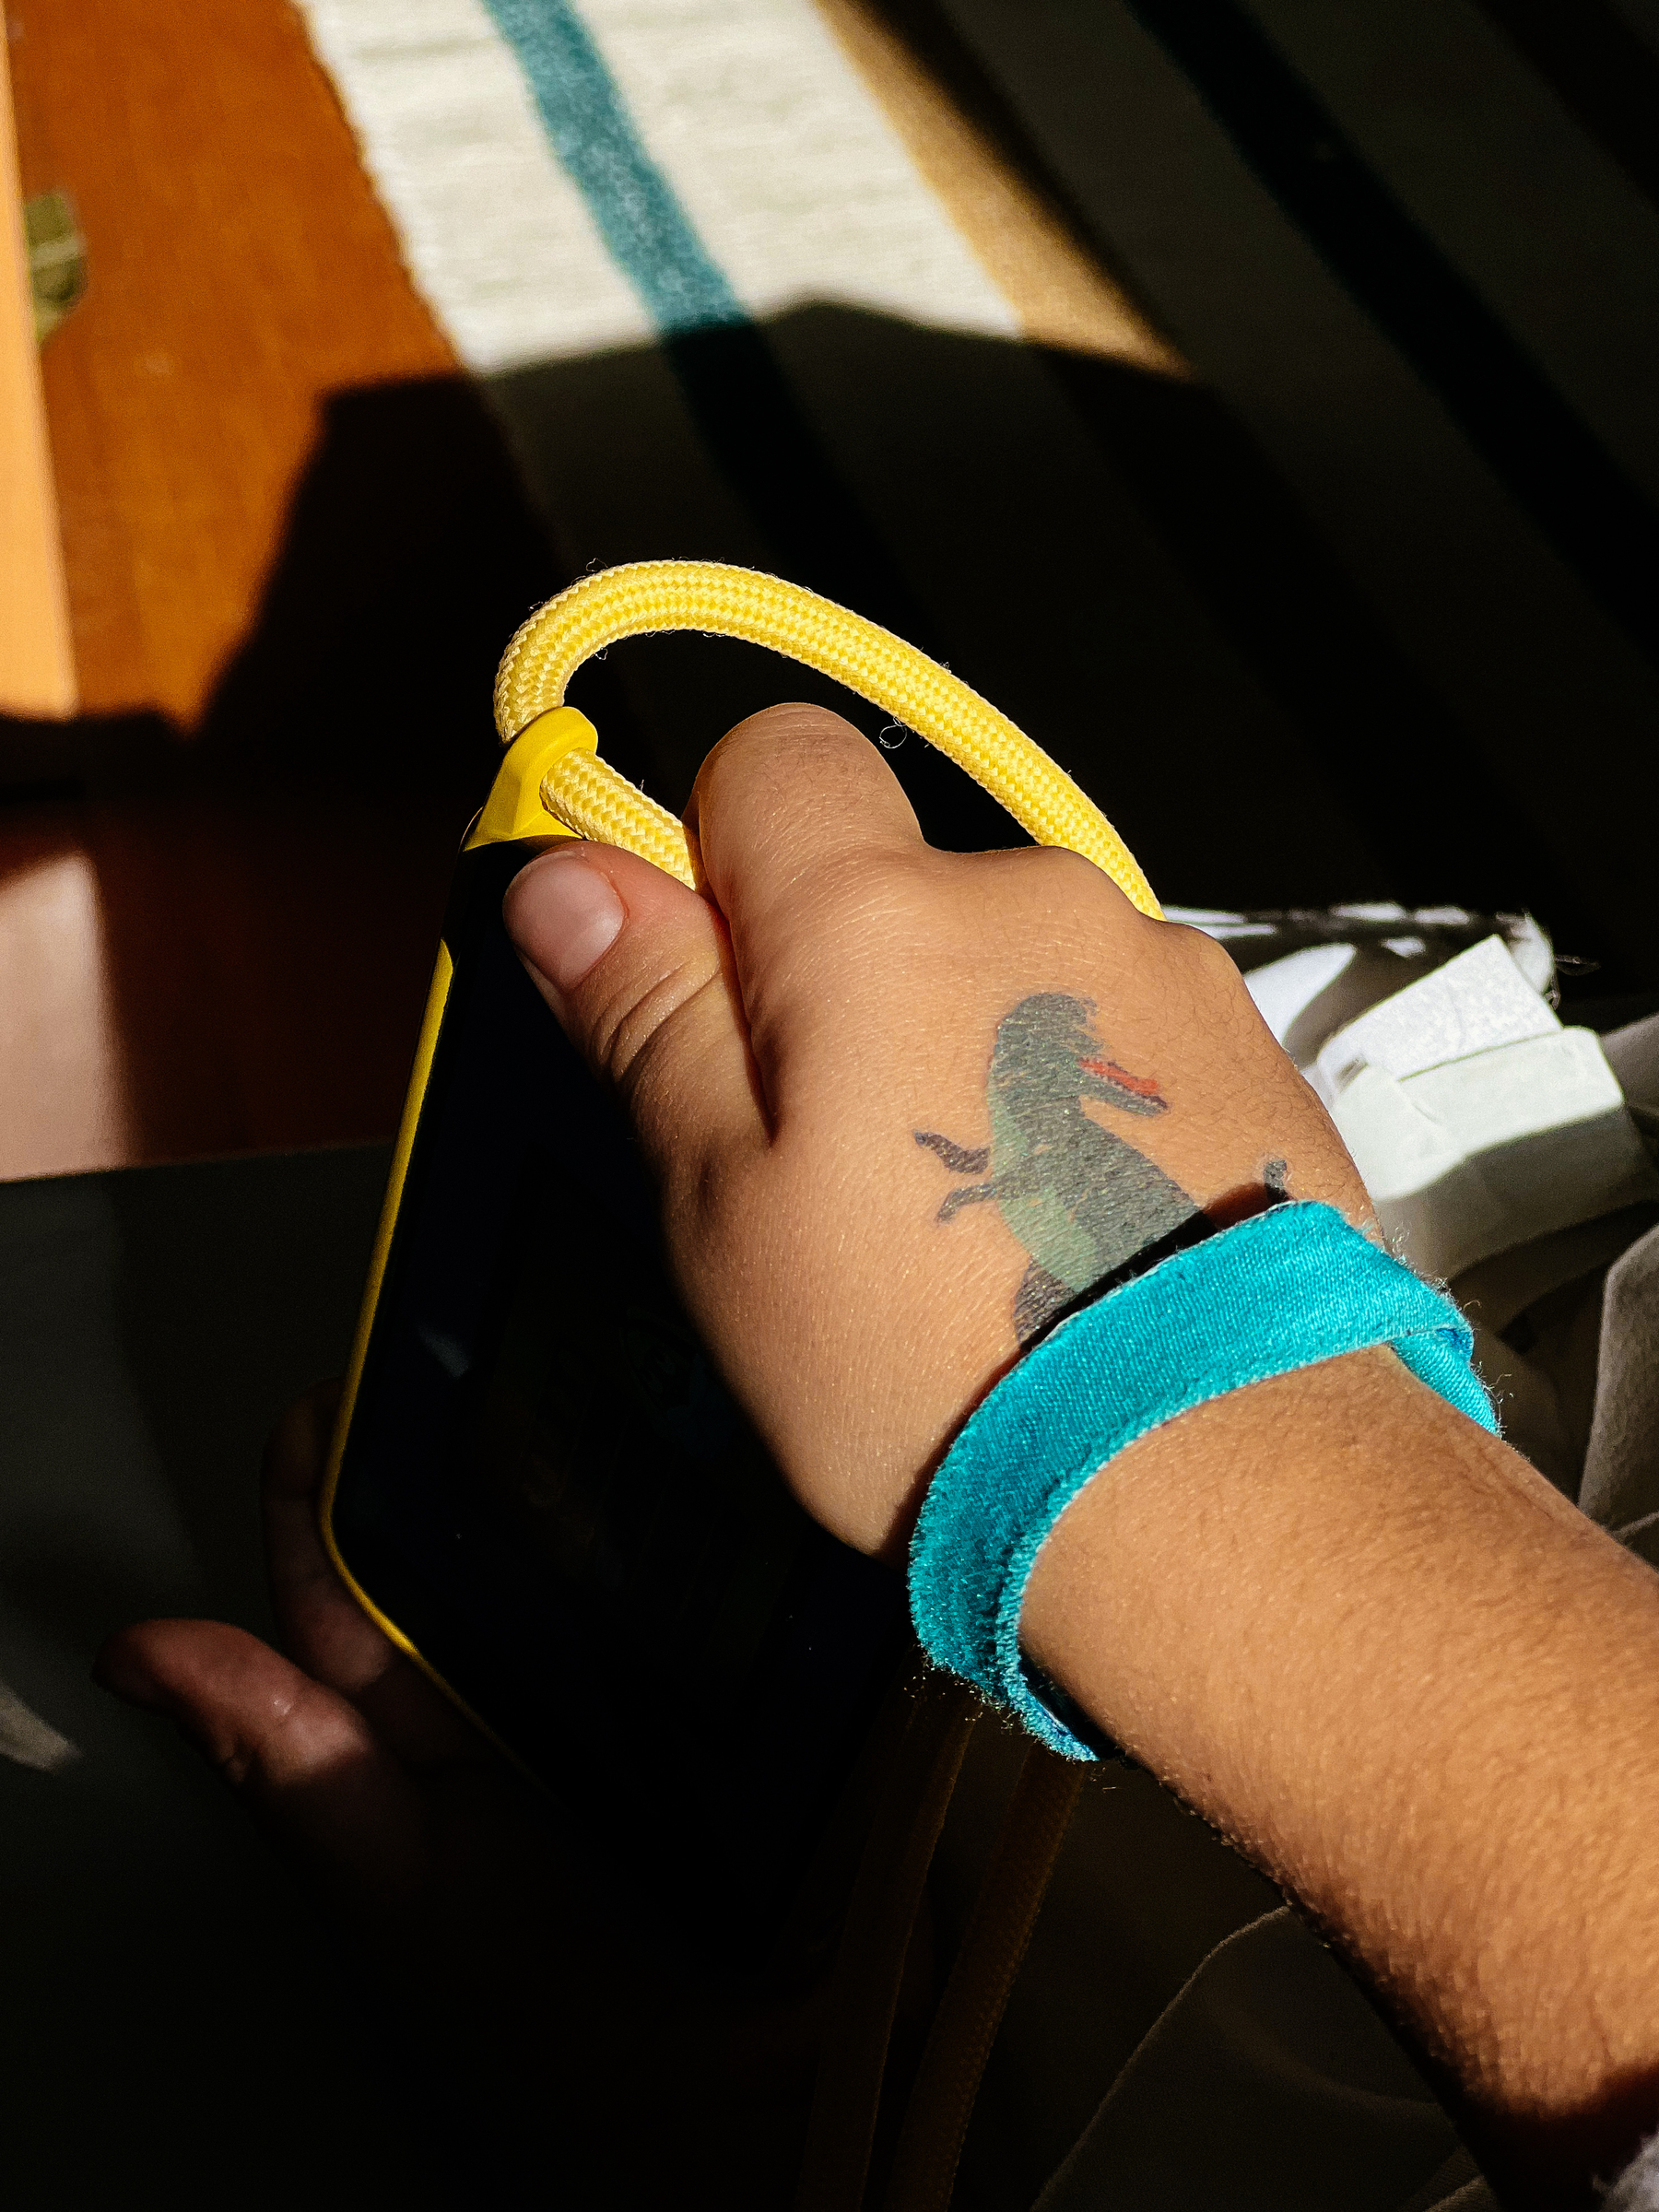 A person&rsquo;s hand holding a yellow jump rope, with a turquoise wristband and a shadow of a dinosaur tattoo on their wrist.